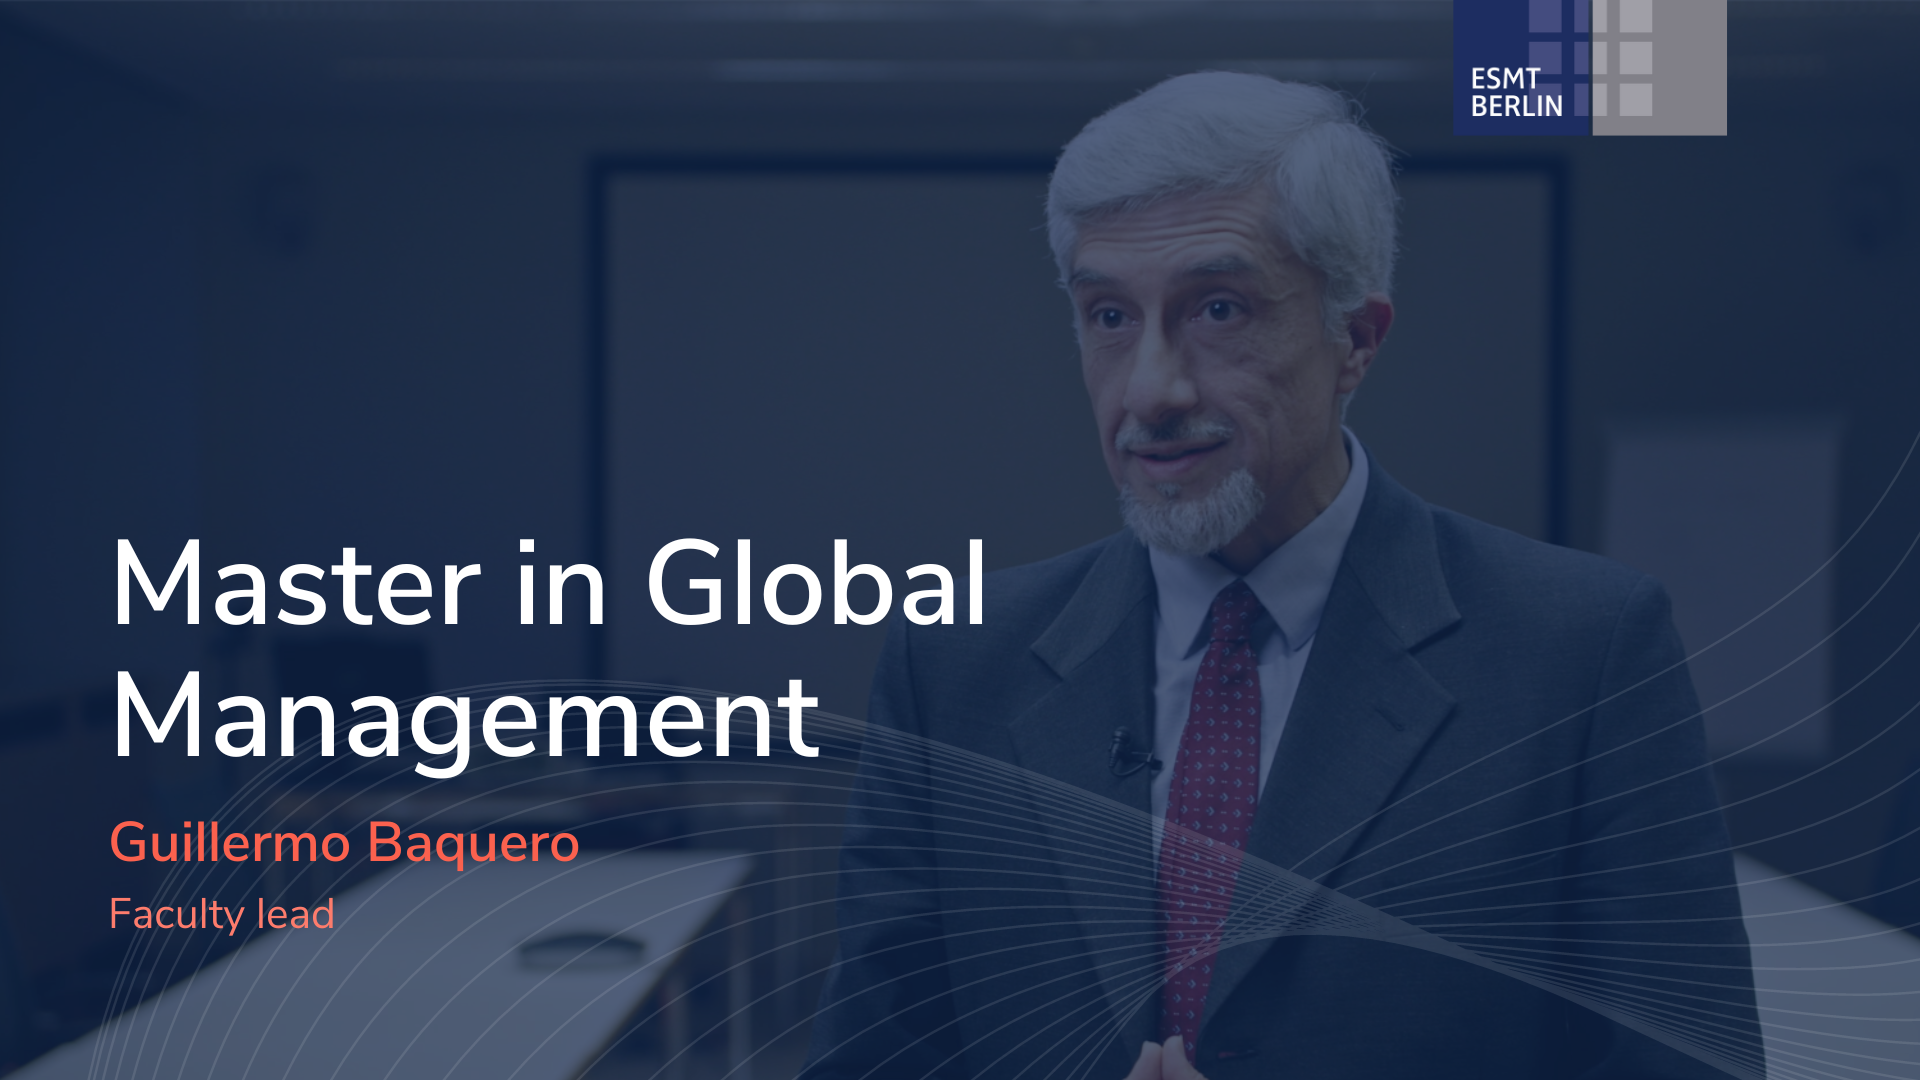 Introduction to the Master in Global Management